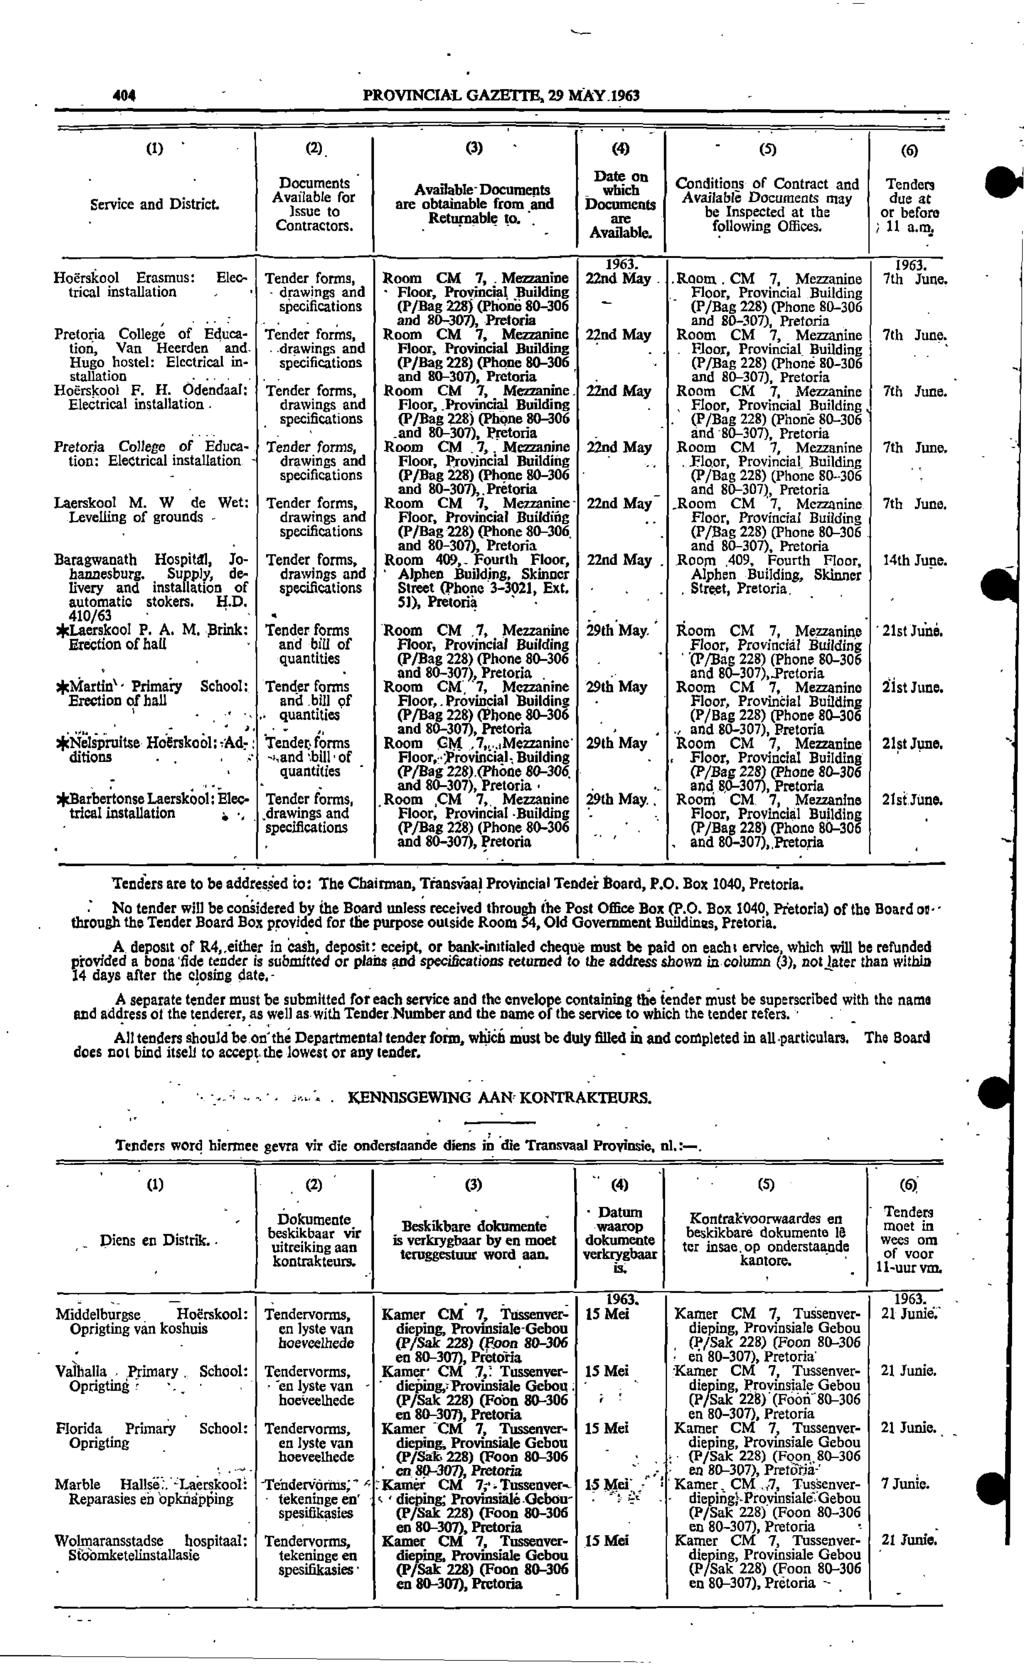 404 (1) PROVNCAL GAZETTE 29 MAY1963 (2) (3) (4) (5) (6) Documents Date on Available Conditions of Contract and Tenders Documents which Available for Available Documents may Service and District are